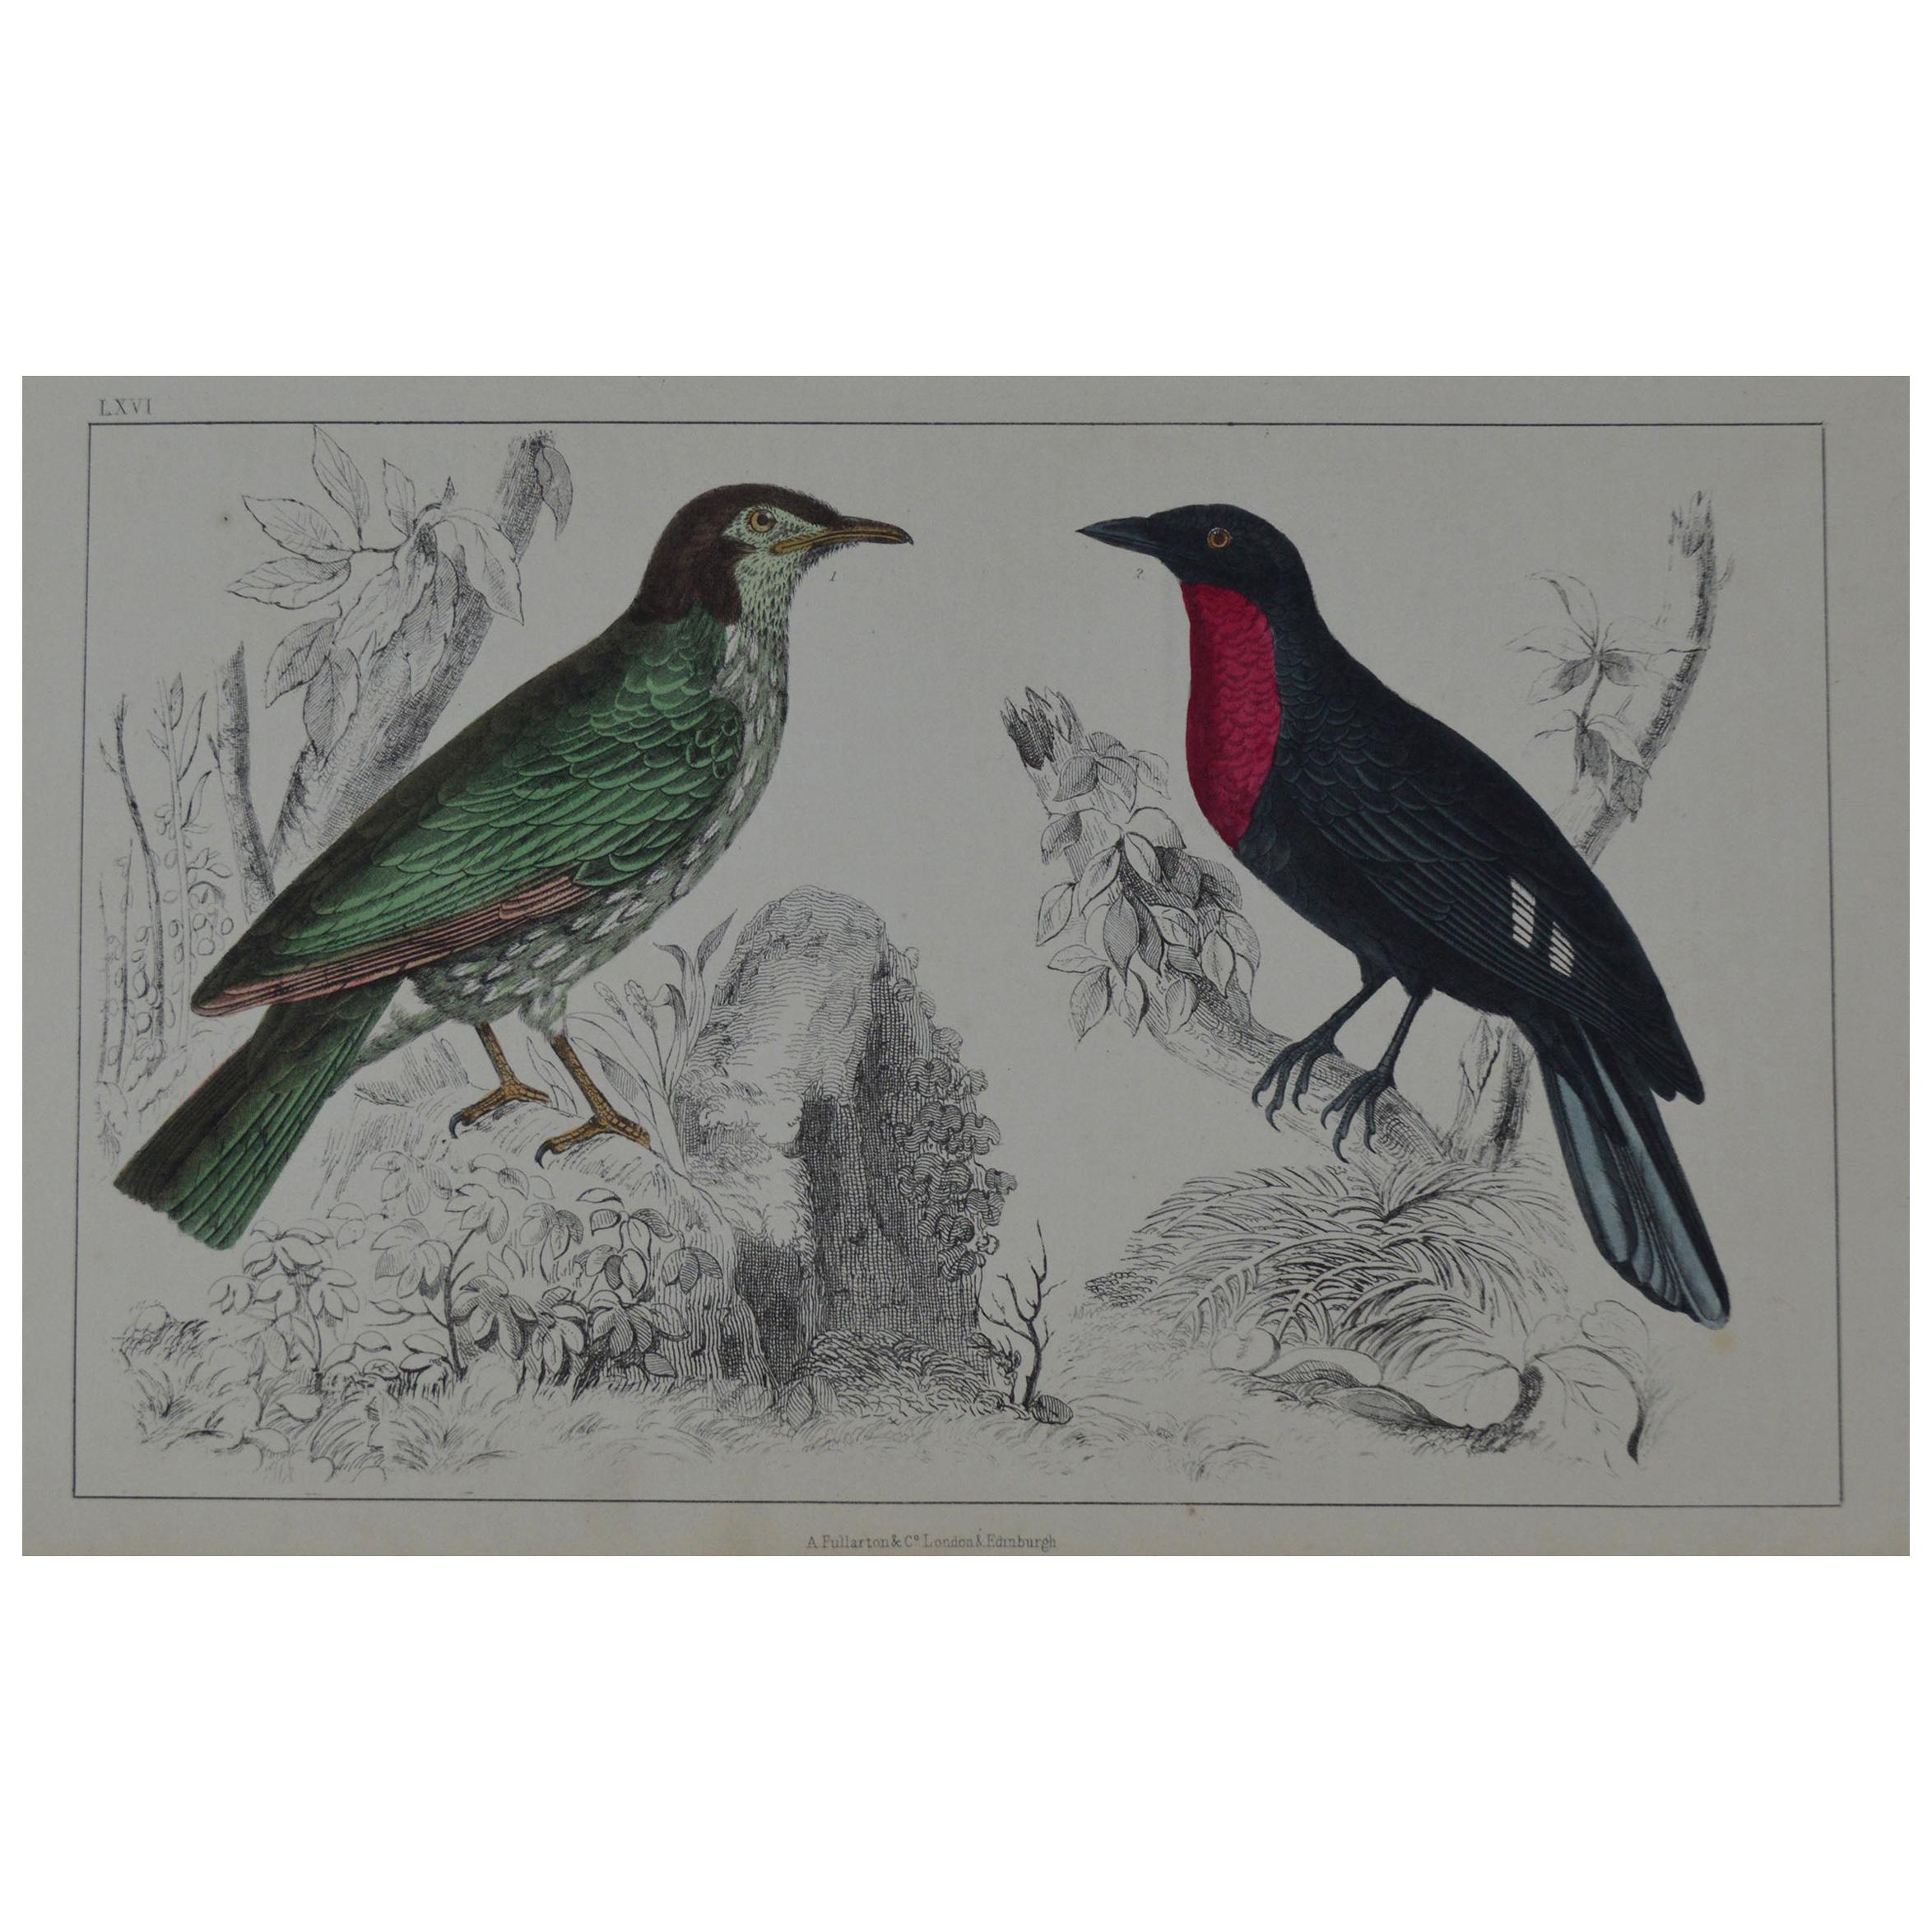 Original Antique Print of a Red Breasted Bird, 1847 'Unframed'